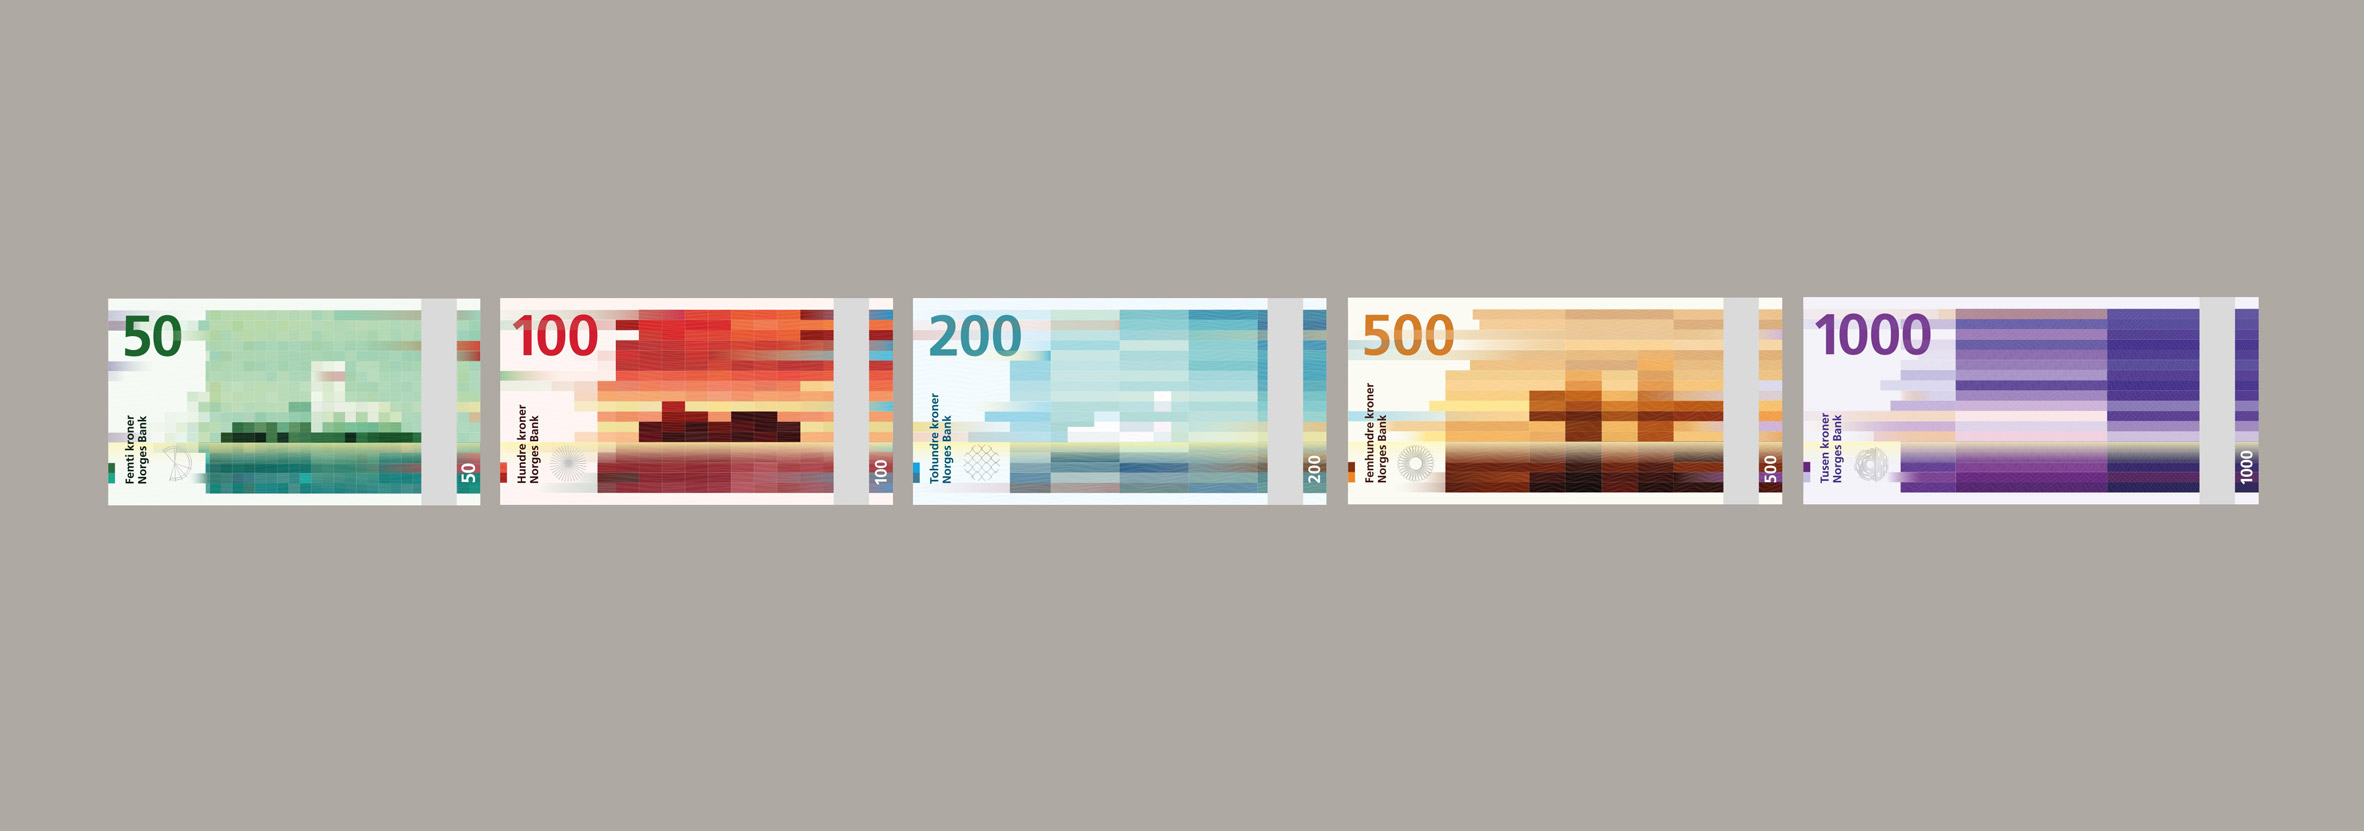 Snøhetta's pixelated design for Norway's banknote goes into circulation